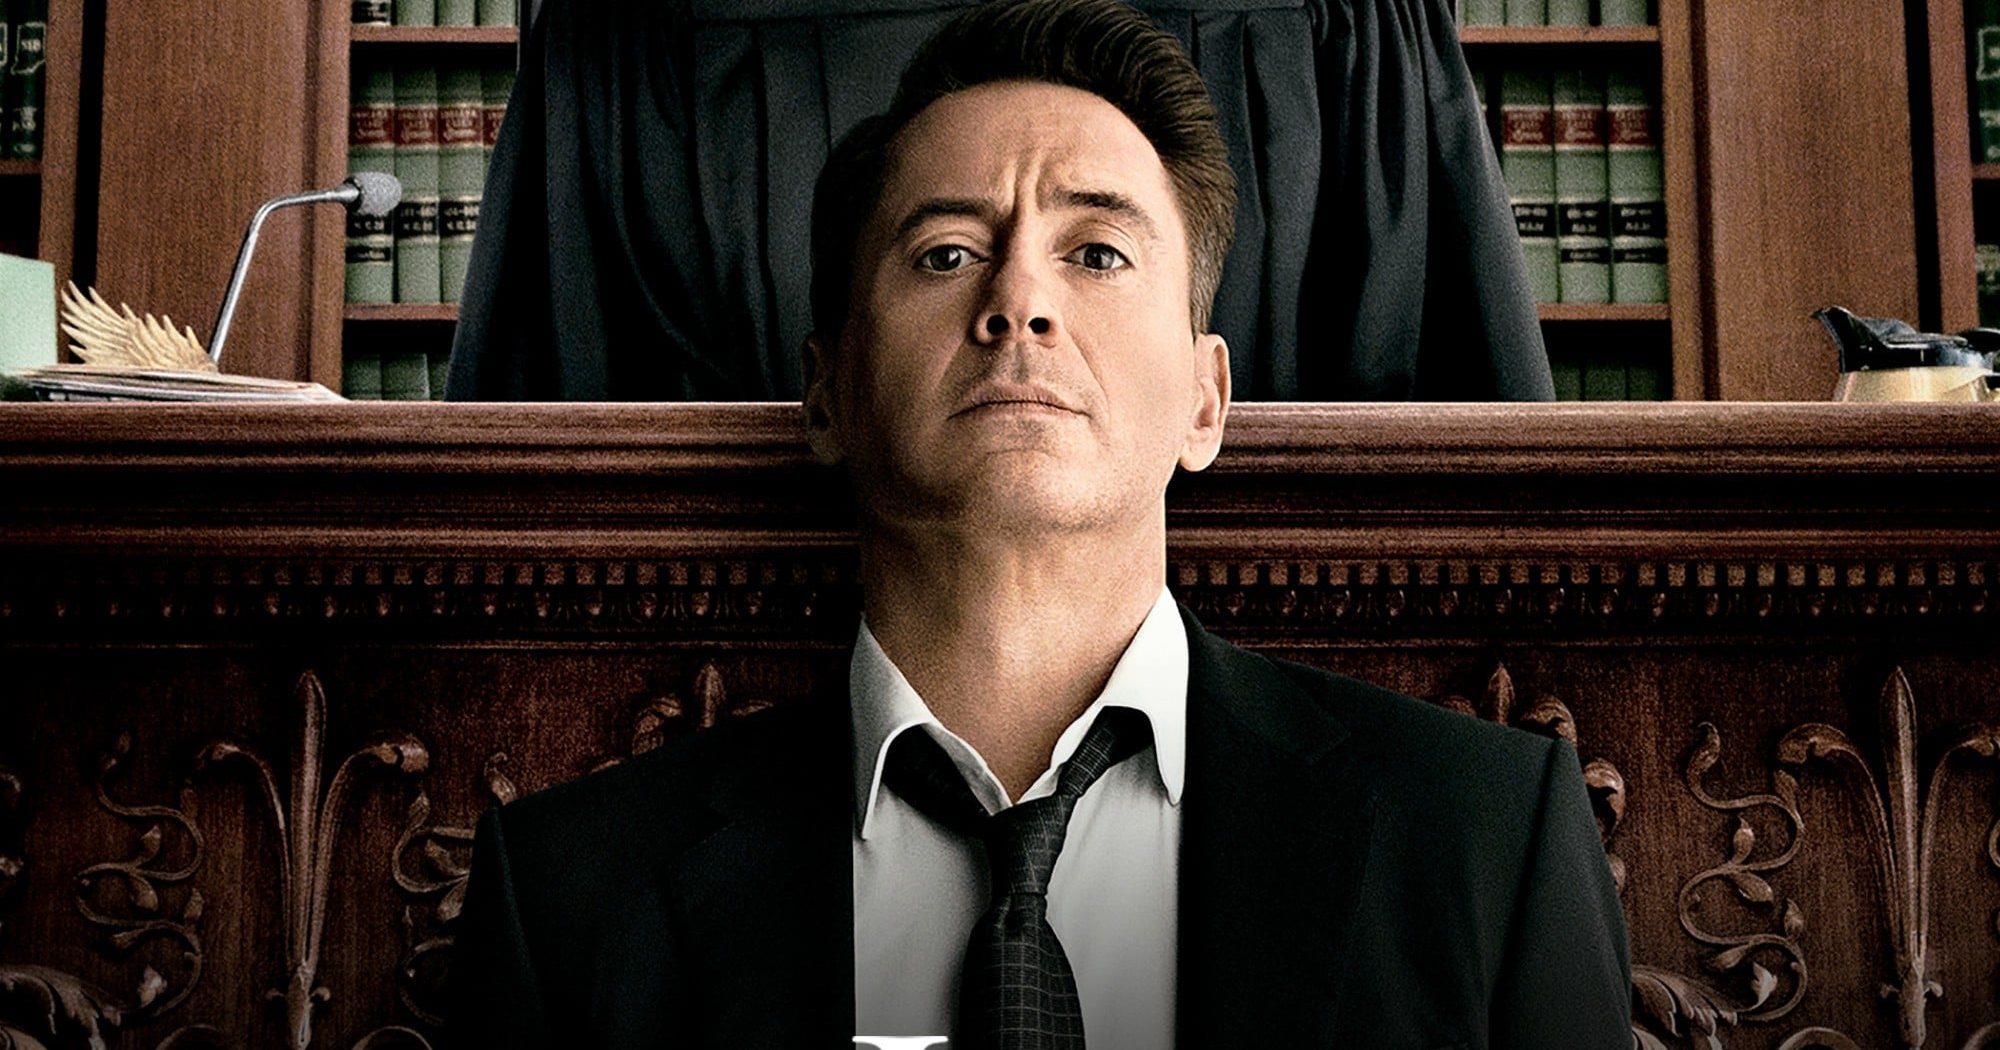 Poster for the movie "The Judge"